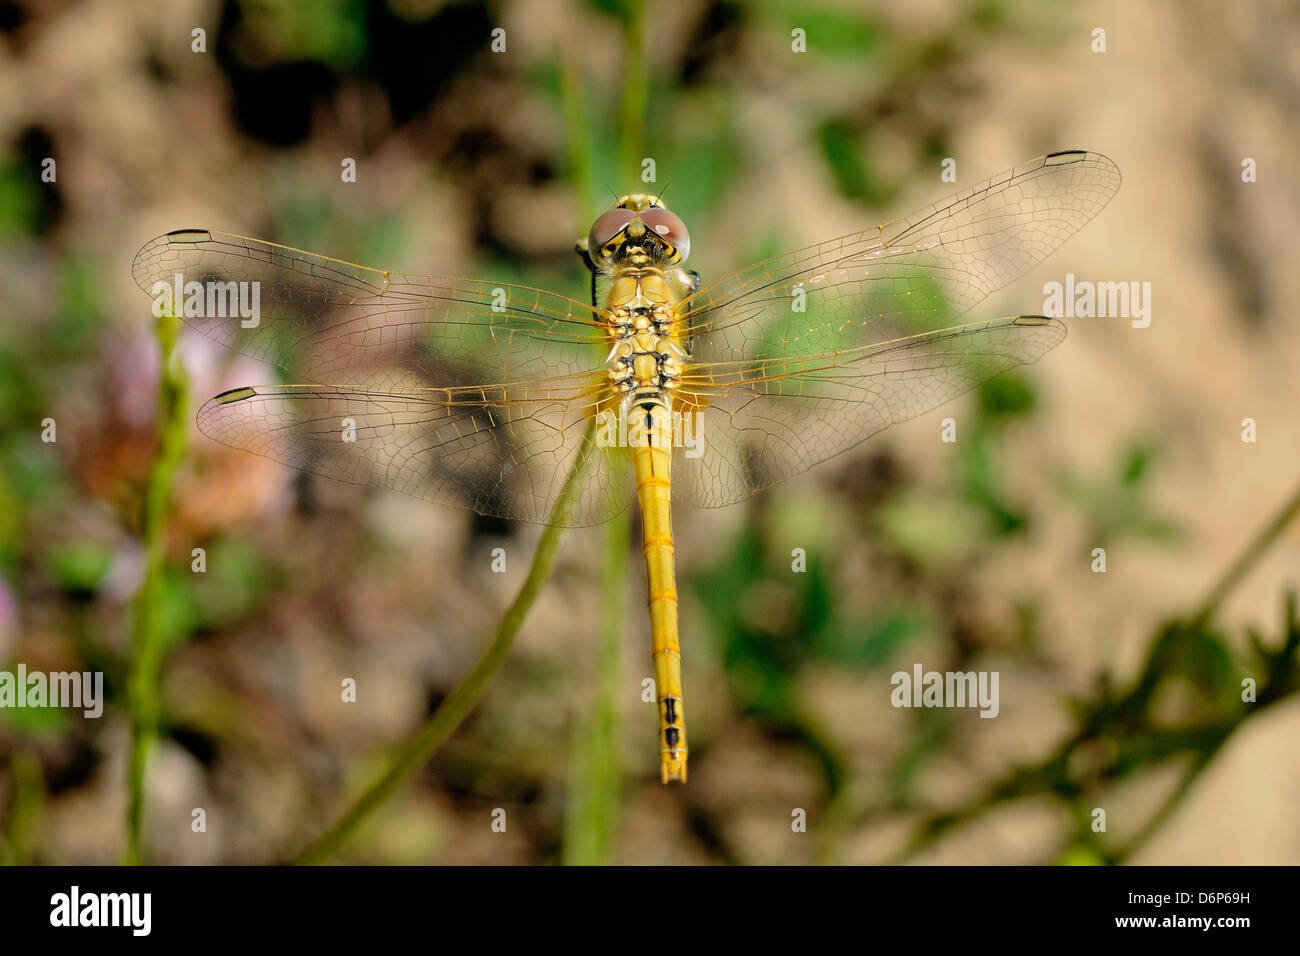 Female red-veined darter dragonfly (Sympetra fonscolombii), Hecho valley, Spanish Pyrenees, Spain, Europe Stock Photo